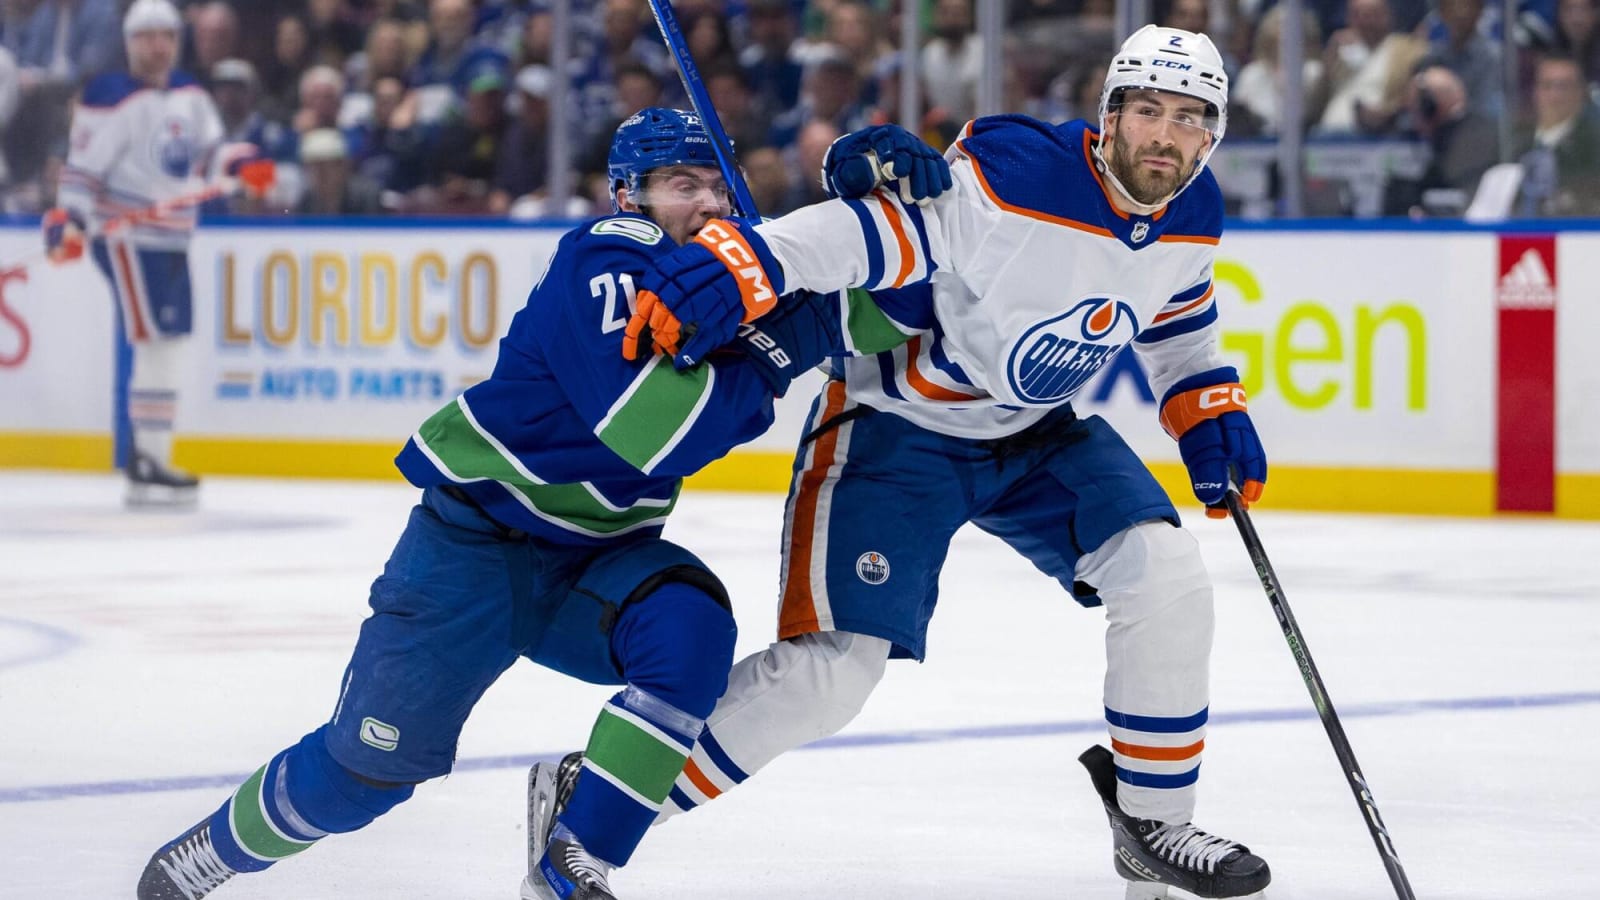 ‘We want penalties called:’ Oilers head coach Kris Knoblauch talks Game 2 refereeing